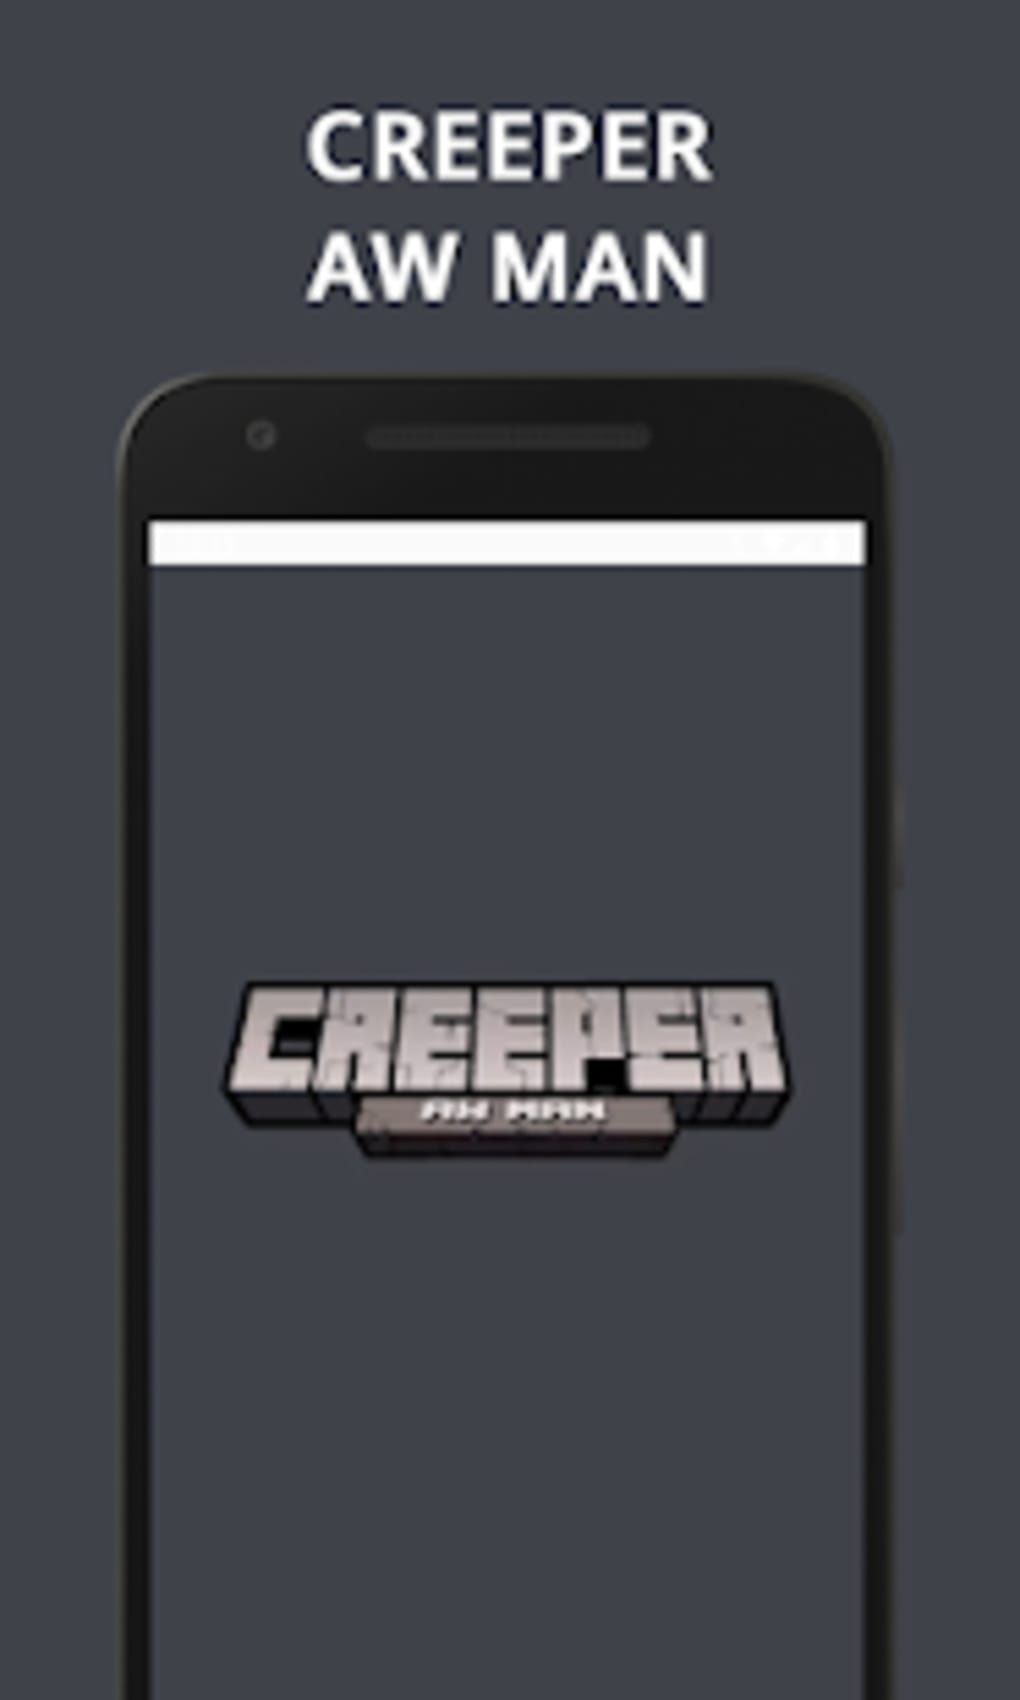 Creeper Aw Man Parody Song Of Minecraft Lyrics For Android